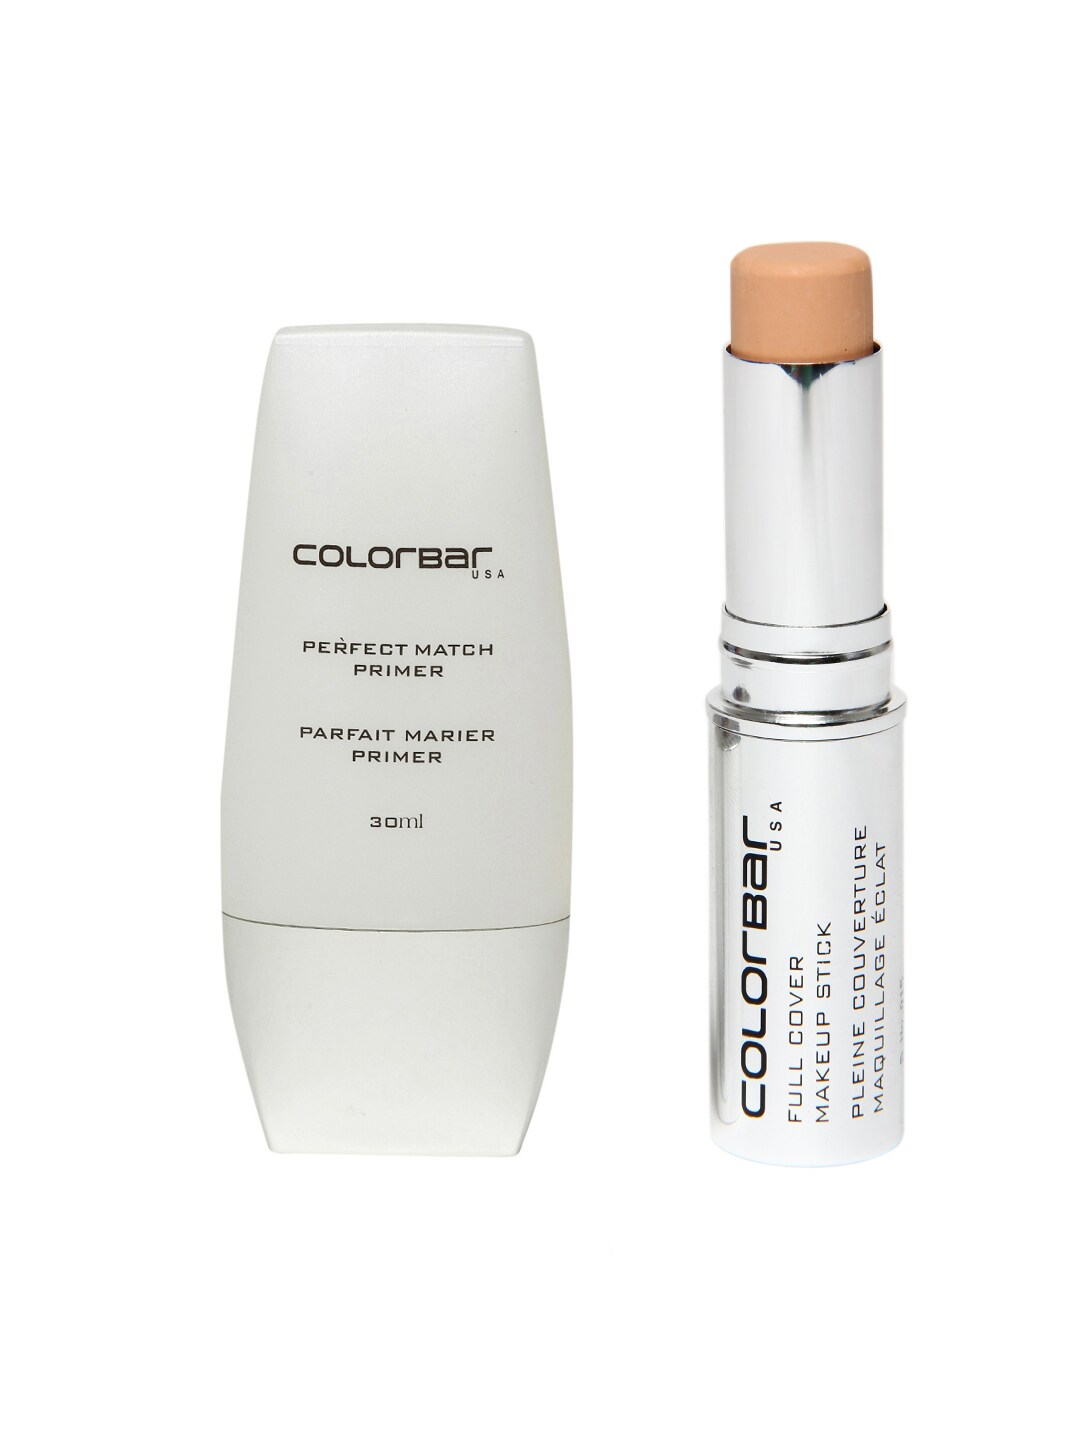 Colorbar Women Pack of Primer & Make-up Stick Price in India